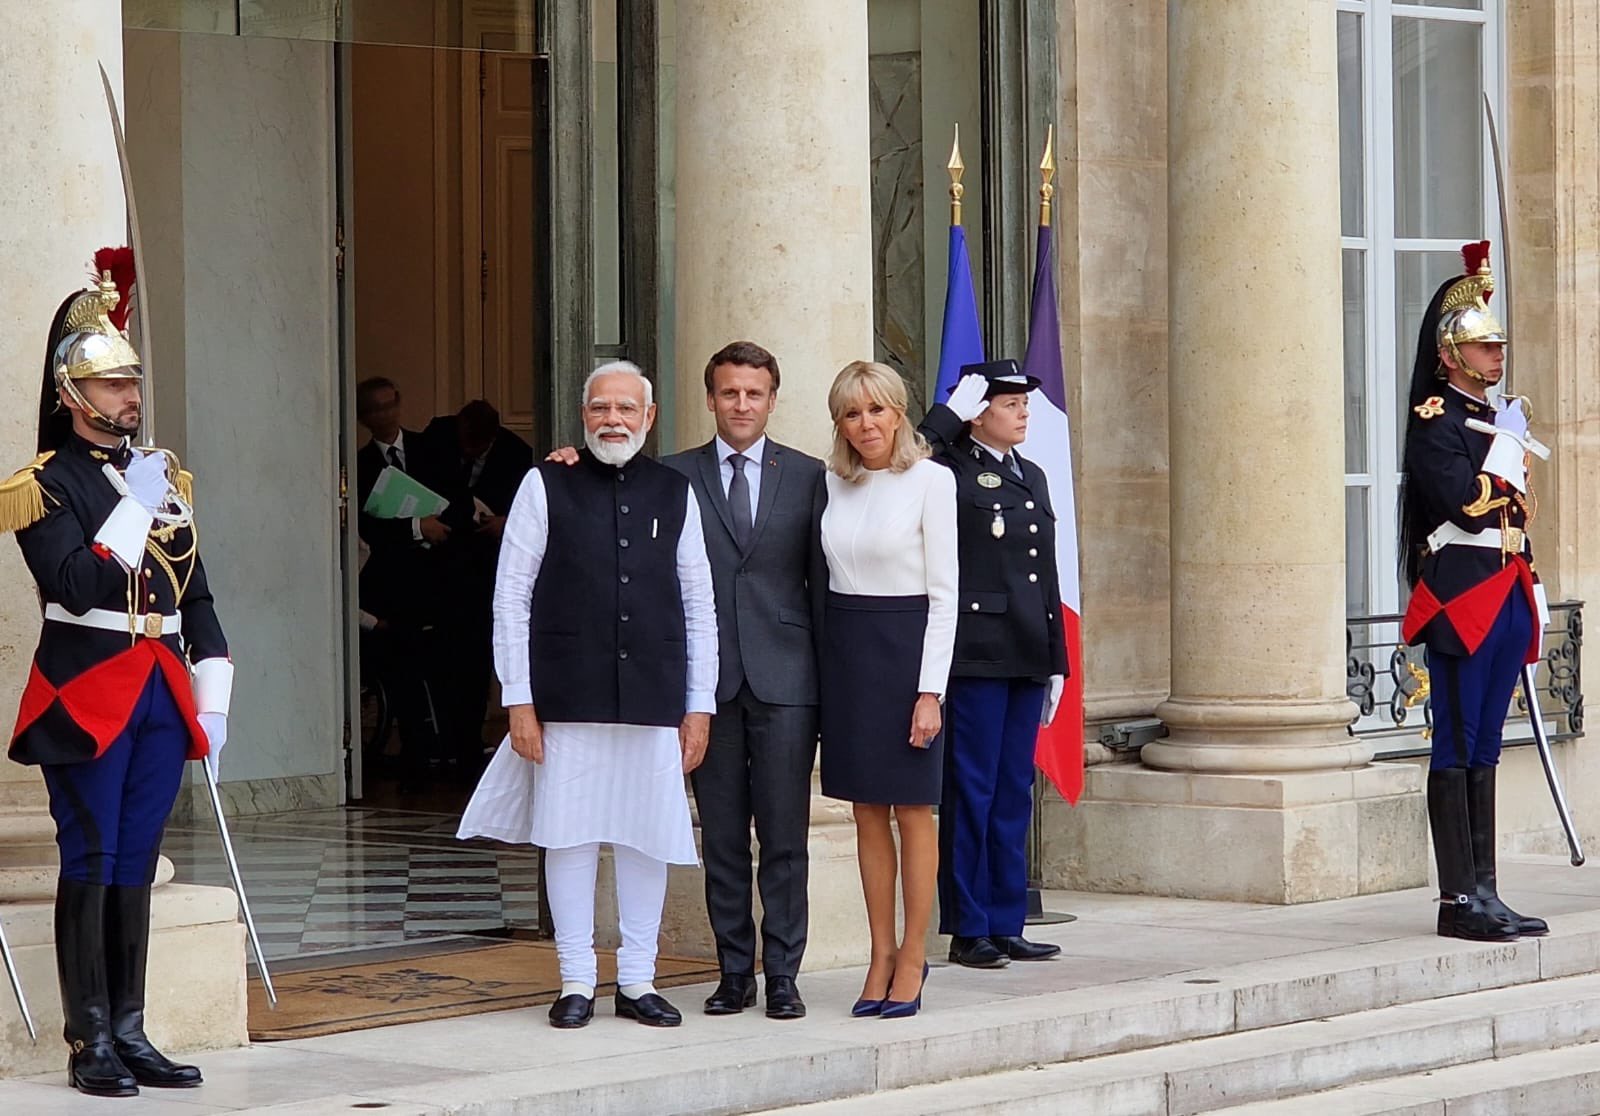 PM Modi, French President Macron discuss bilateral as well as global issues